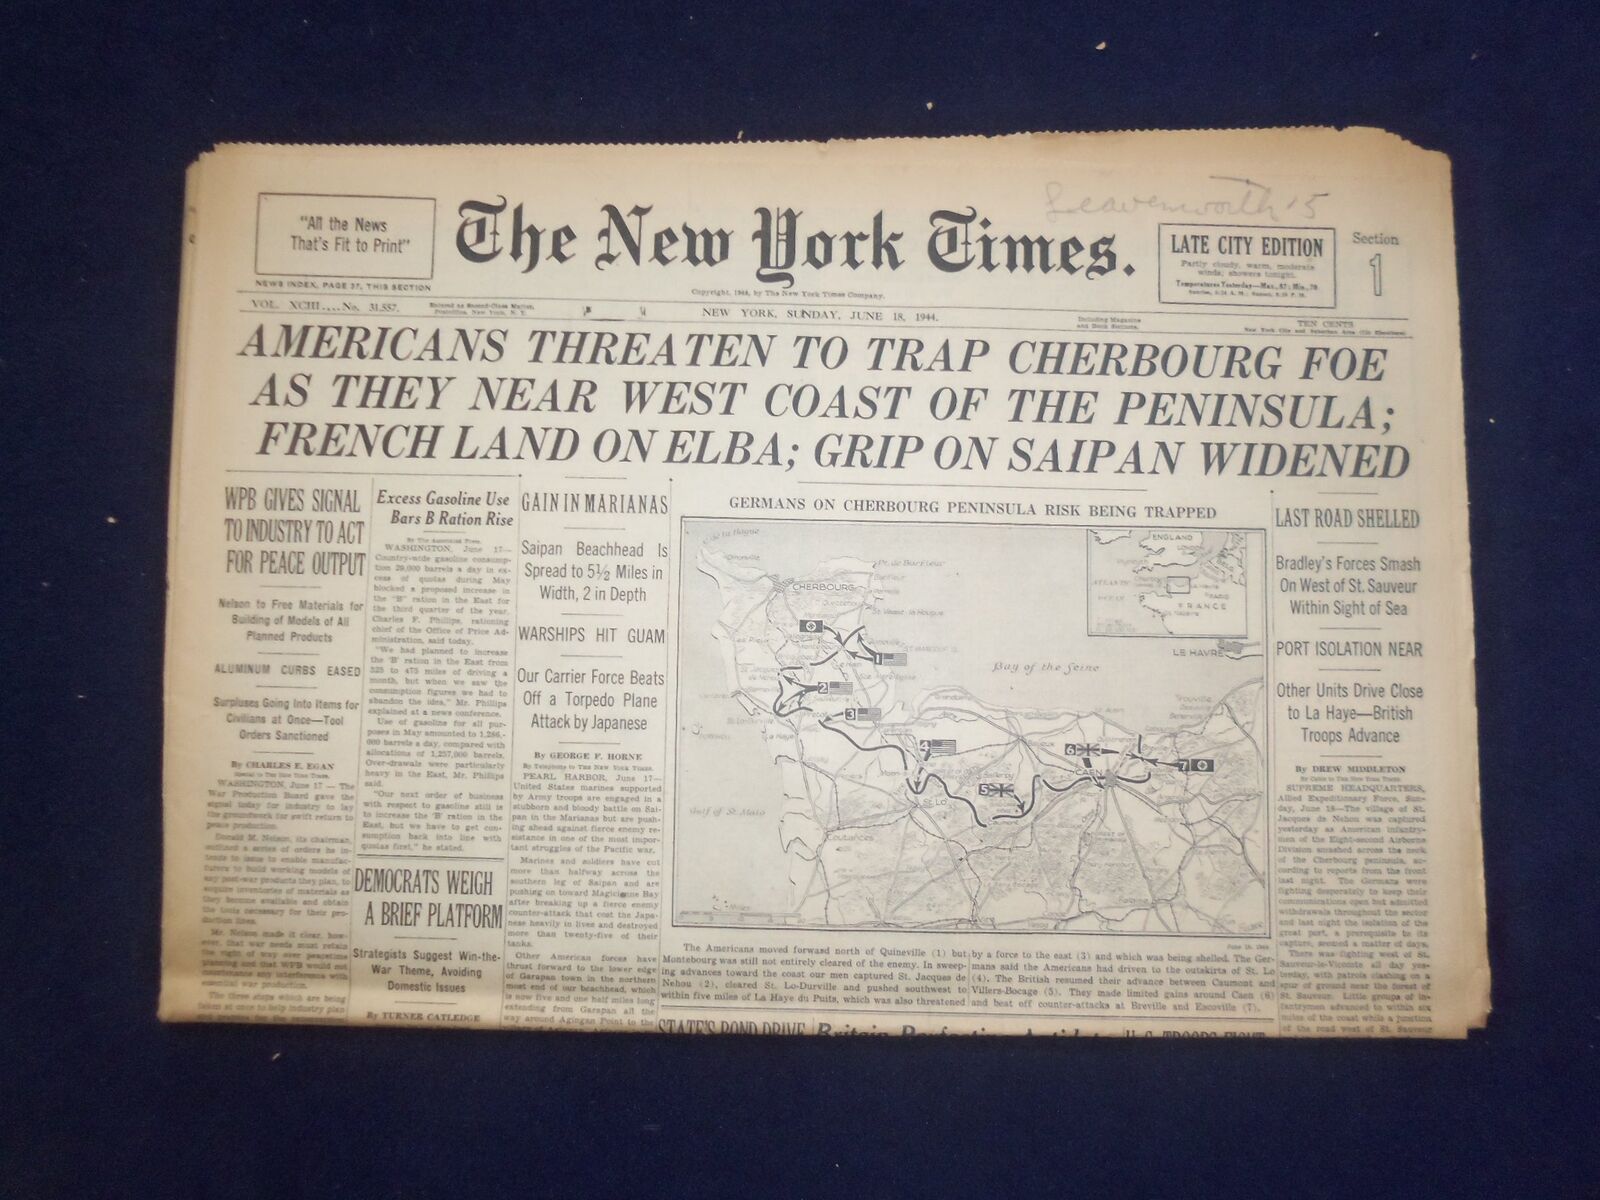 1944 JUNE 18 NEW YORK TIMES - AMERICANS THREATEN TO TRAP CHERBOURG FOE - NP 6571